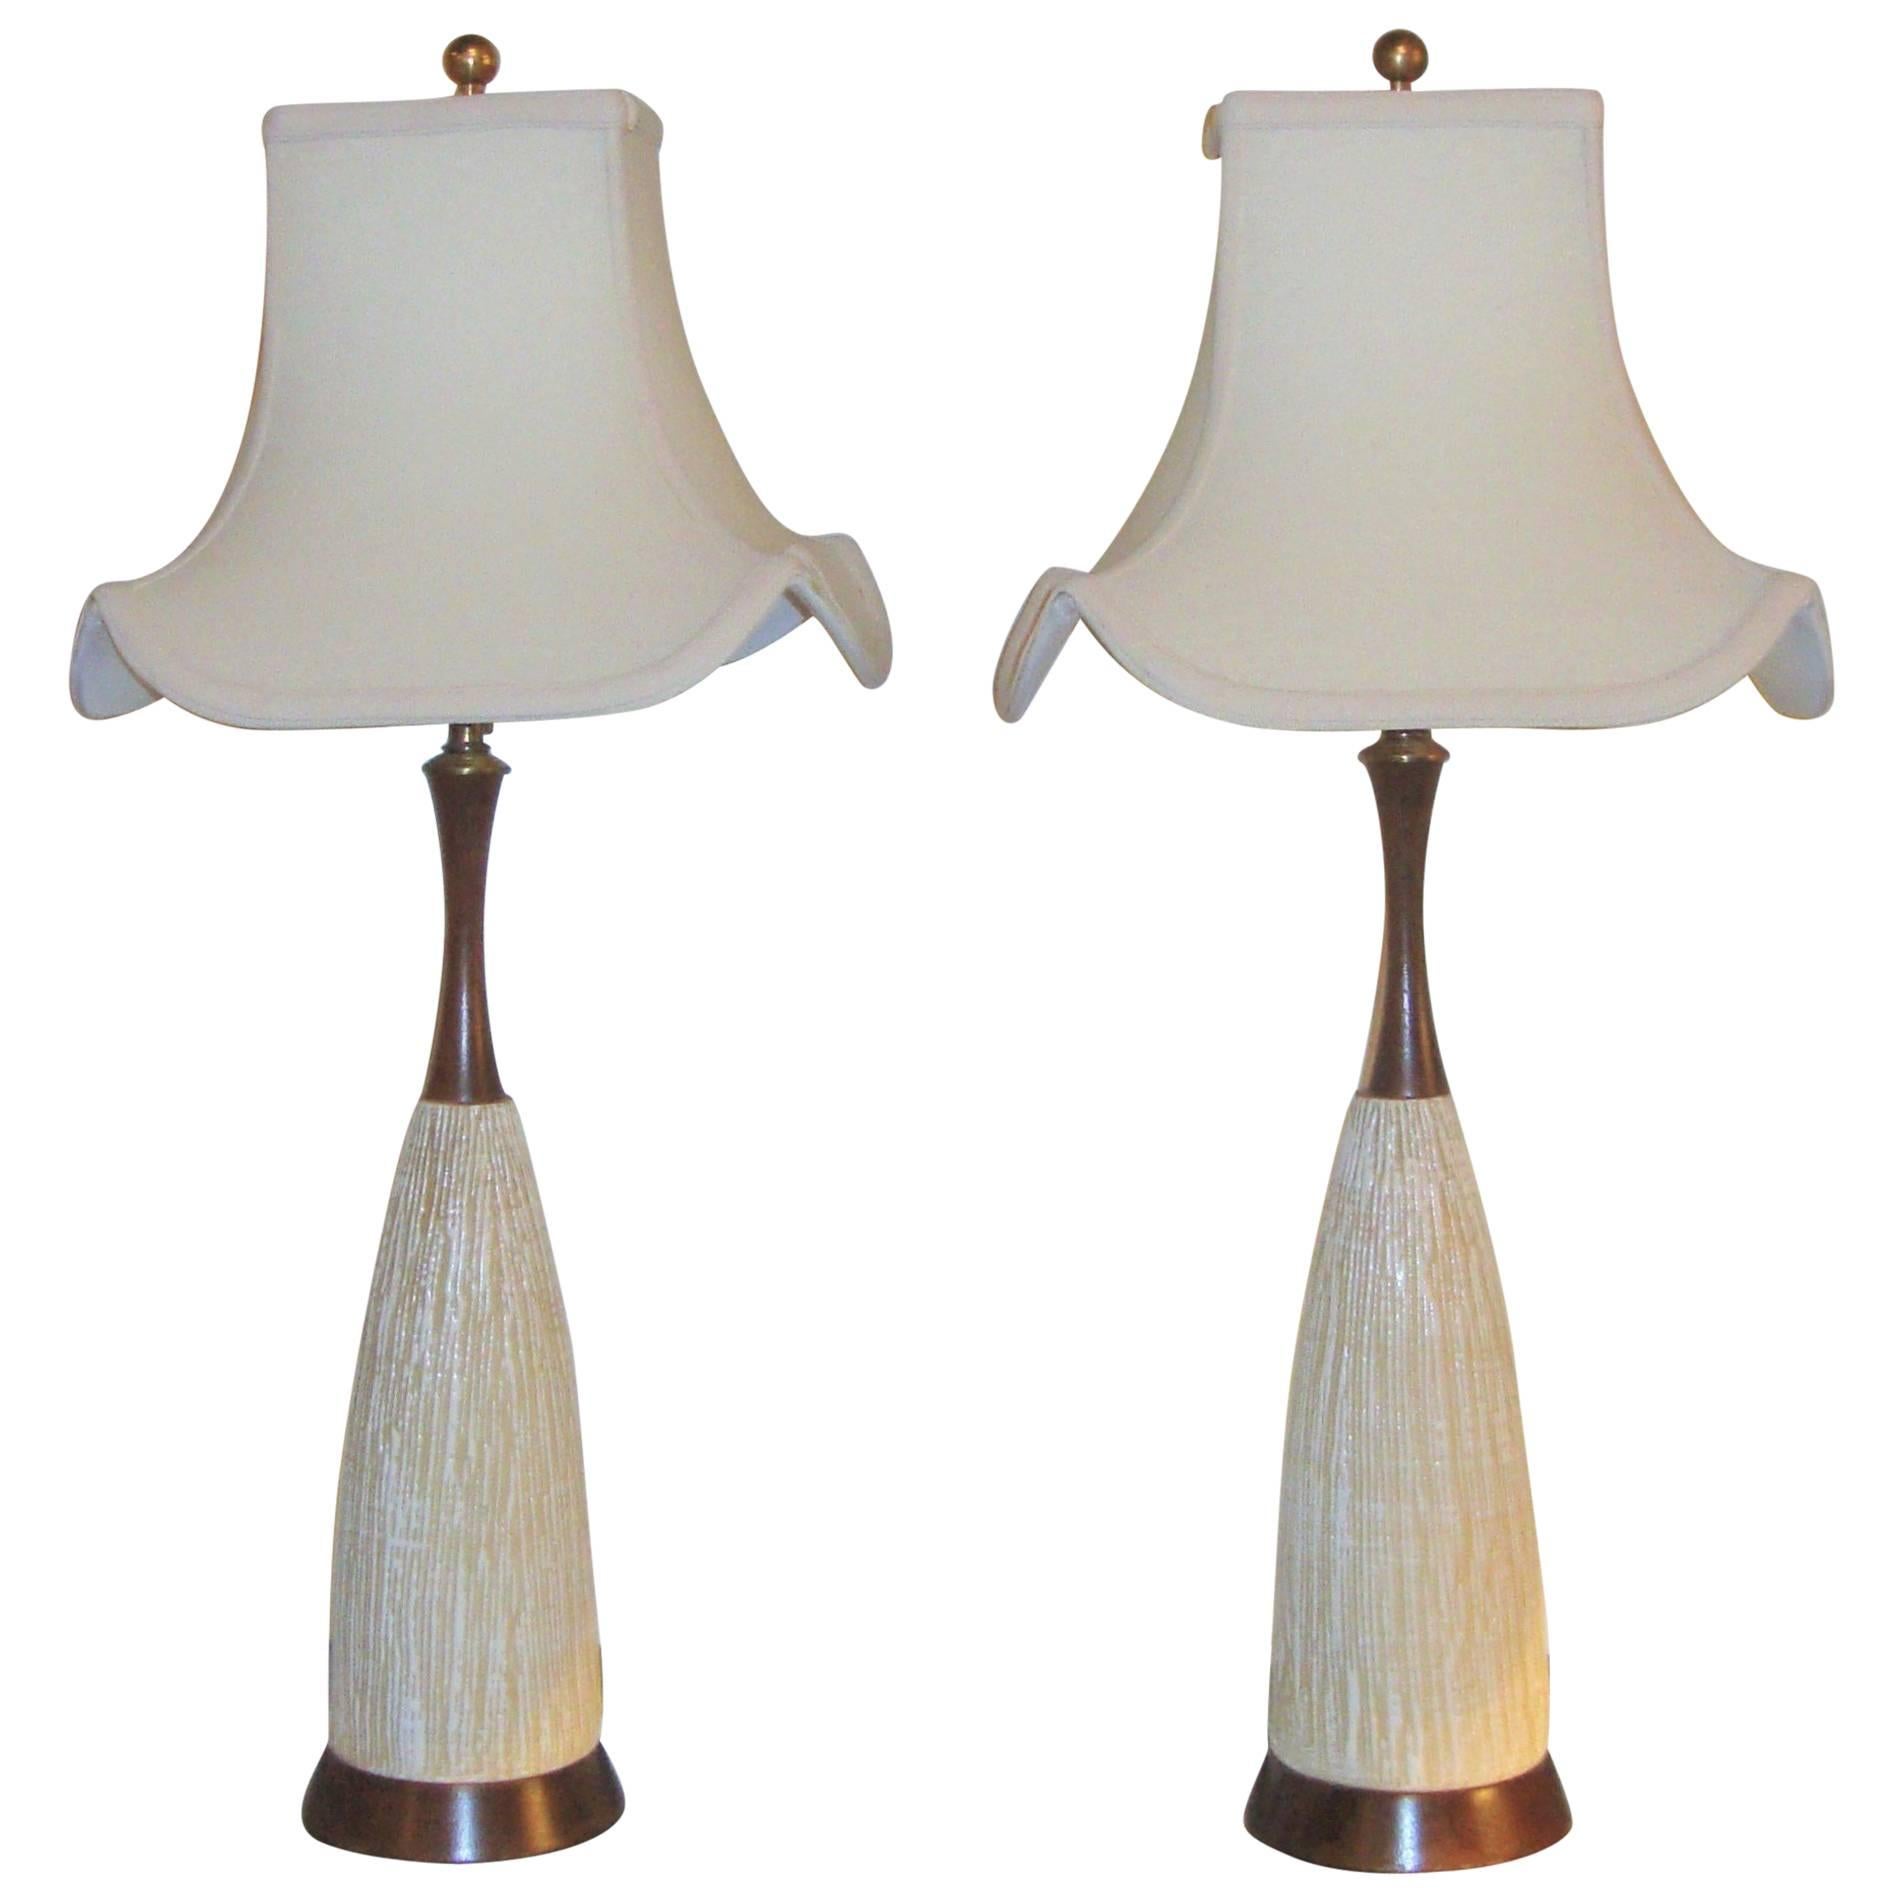 Pair of Art Deco Style Lamps